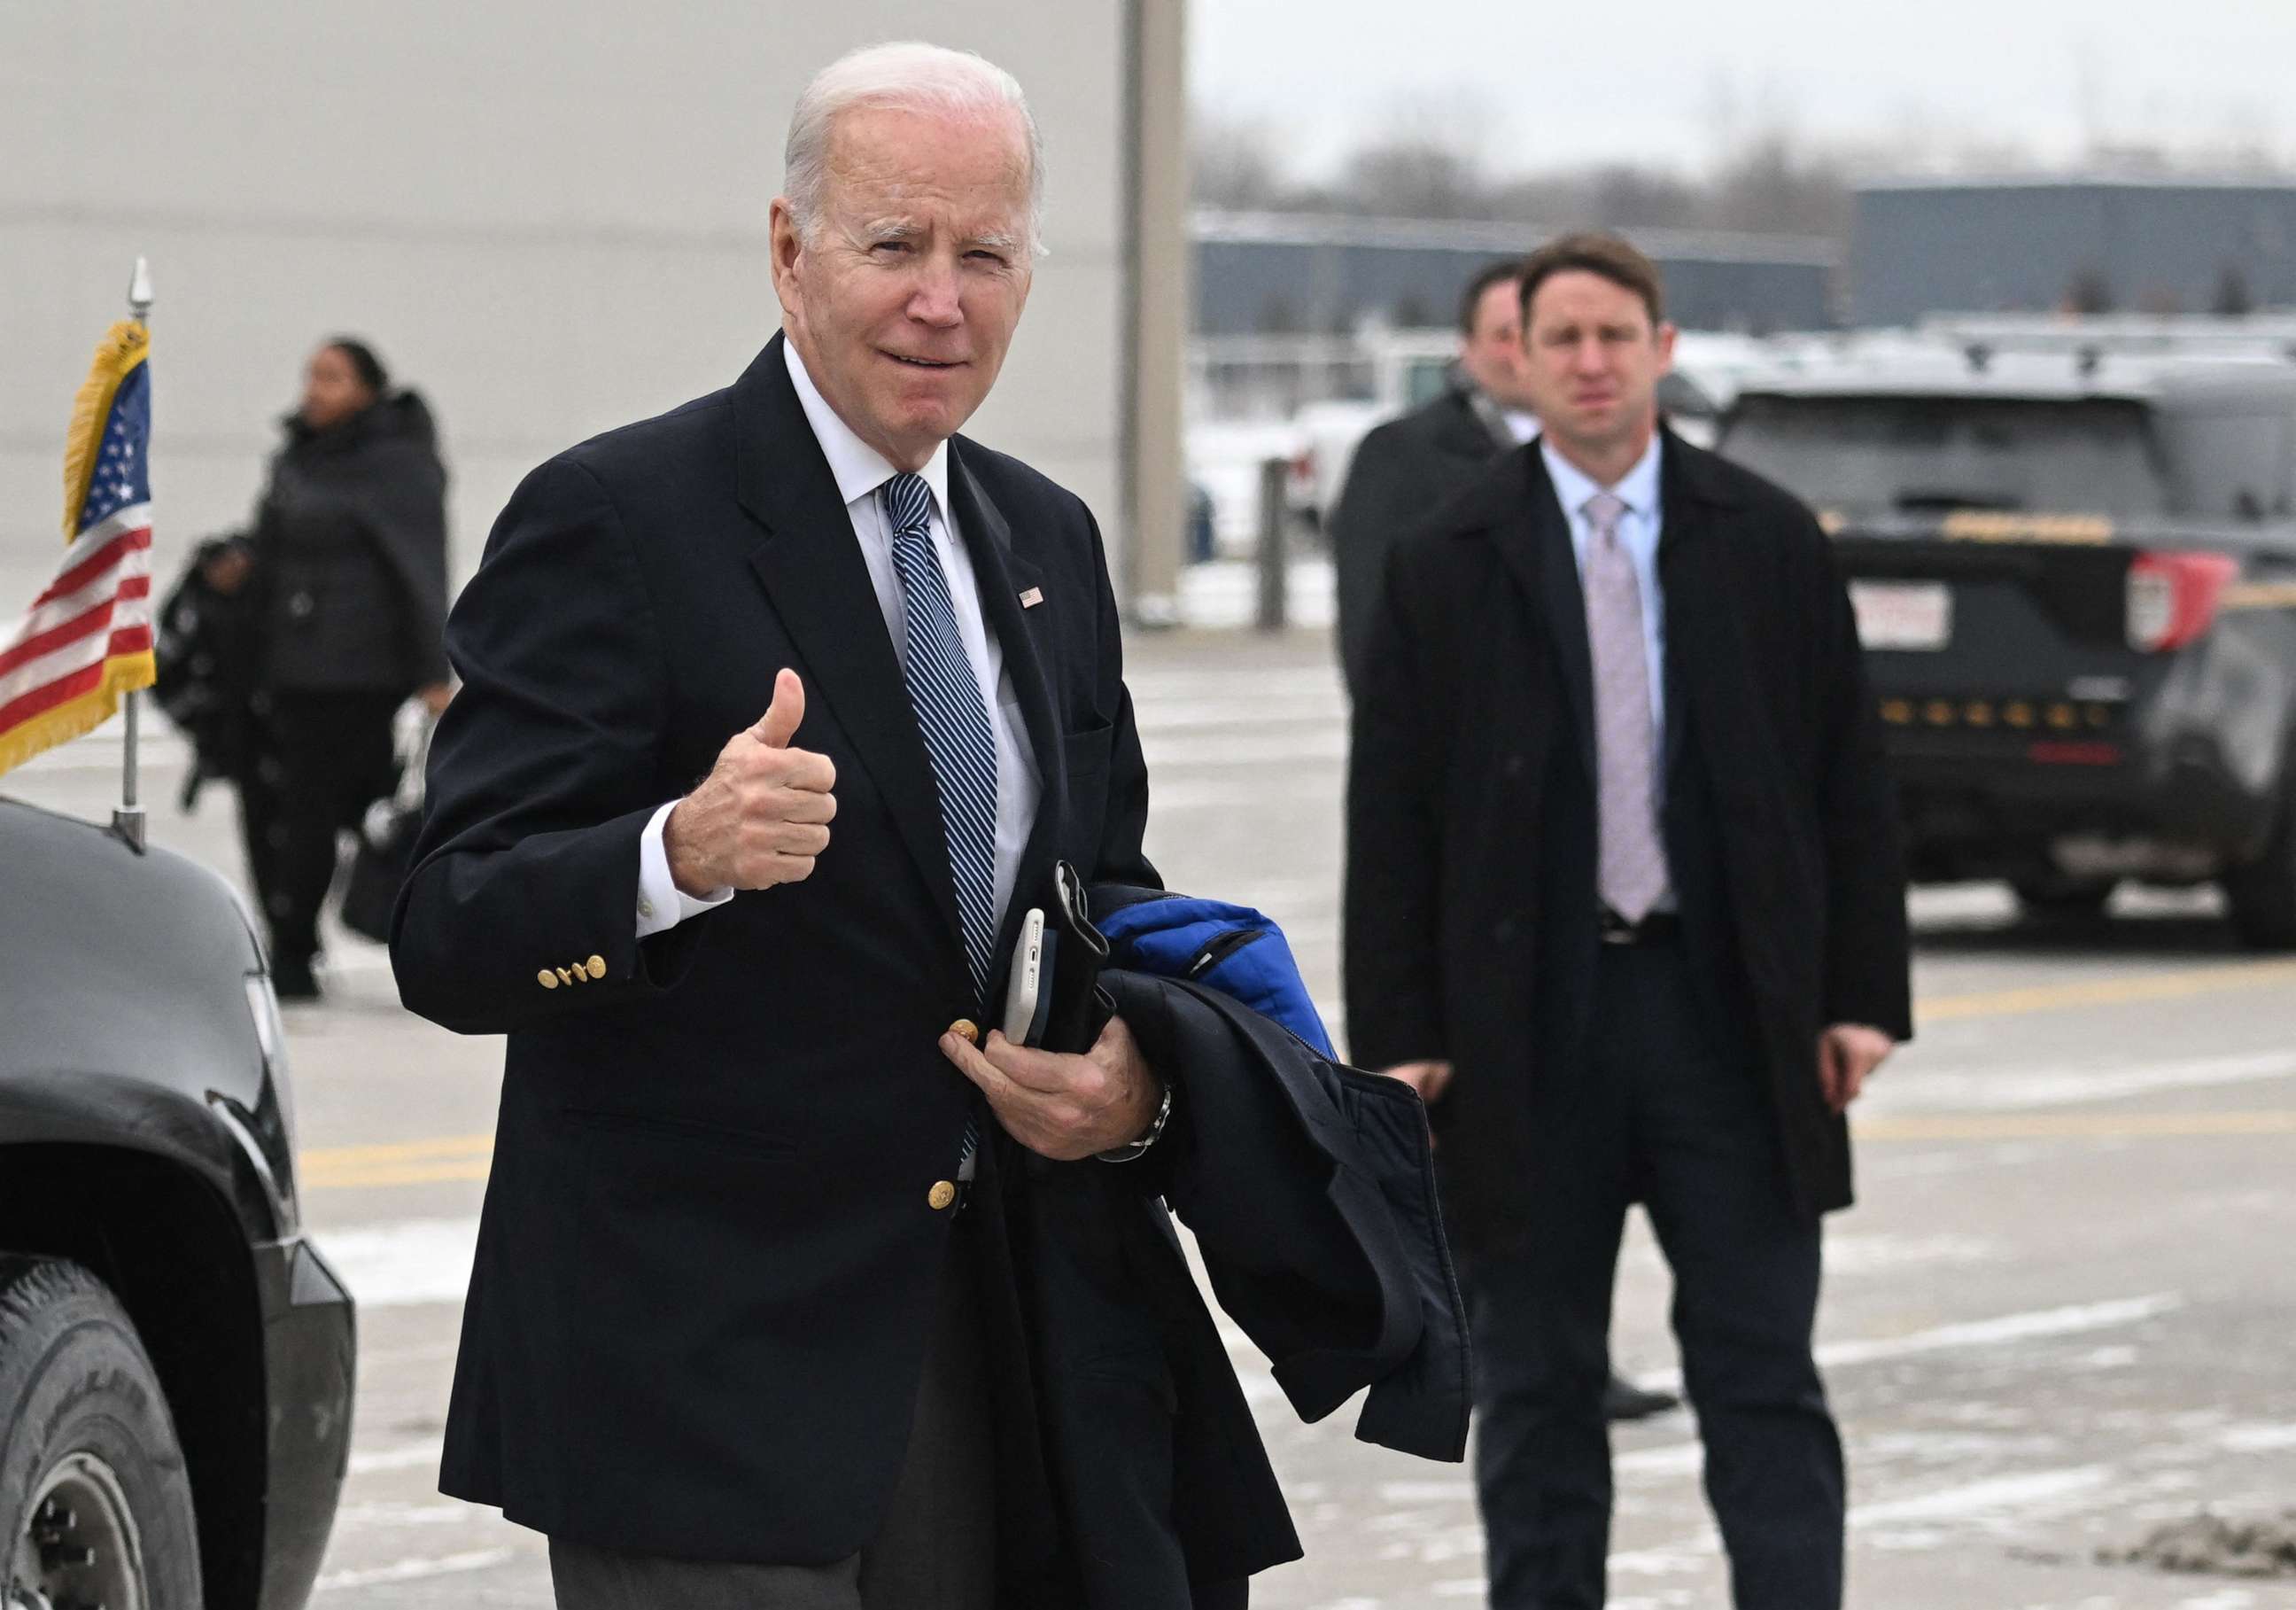 PHOTO: President Joe Biden gives a thumbs up as he arrives to board Air Force One at Hancock Field Air National Guard Base in Syracuse, N.Y., on Feb. 4, 2023.